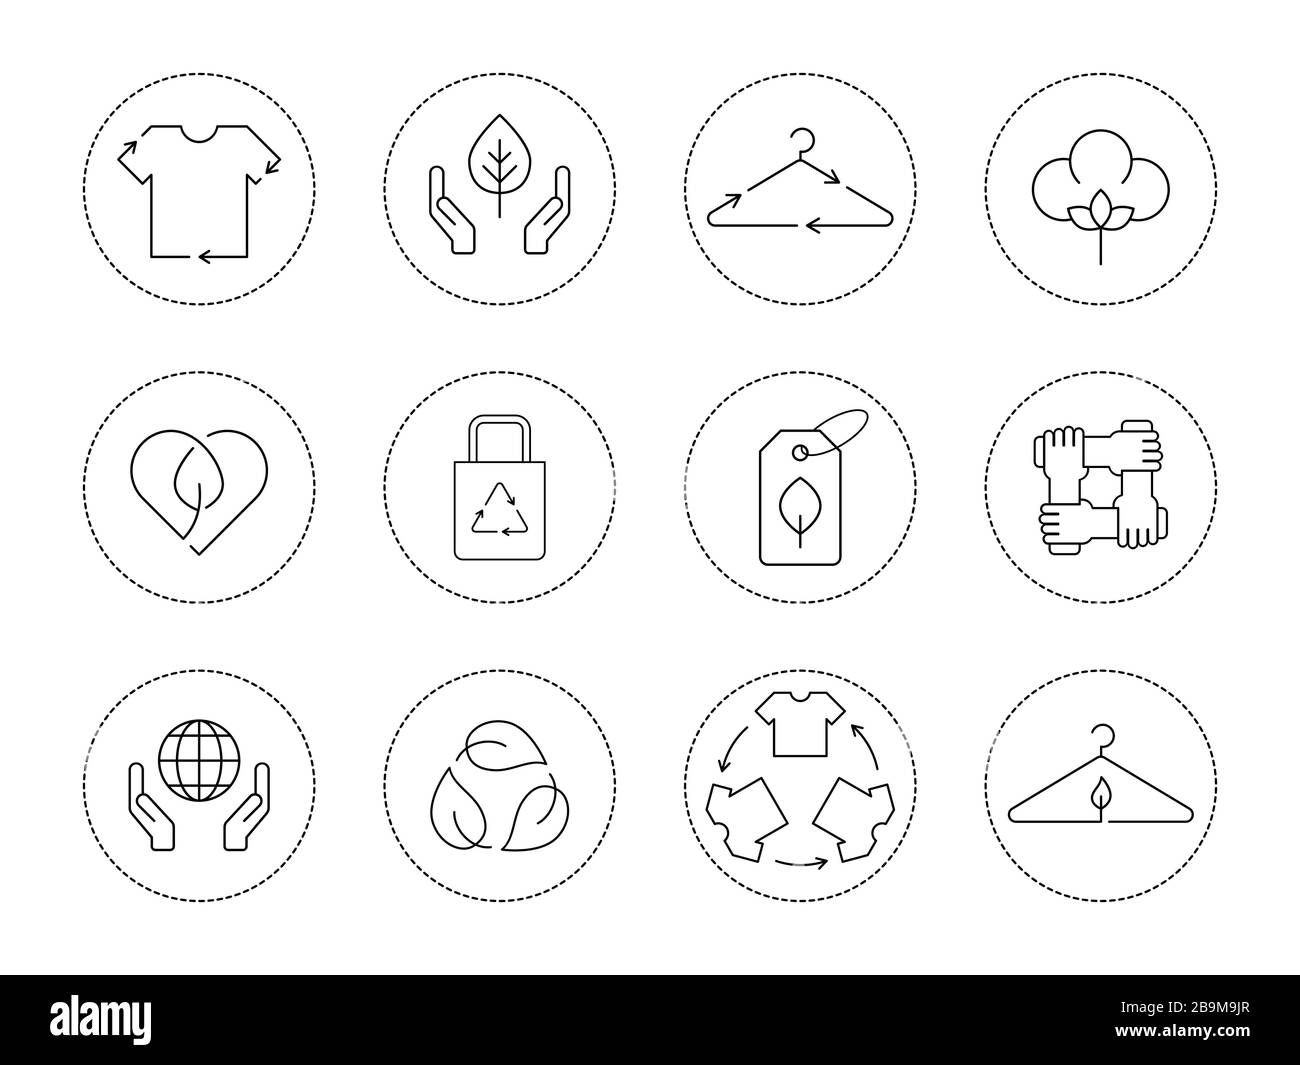 Sustainable textile industry icon set. Eco friendly, recycle clothing, fair trade, natural materials, slow fashion. Ethical fashion linear icons Stock Vector